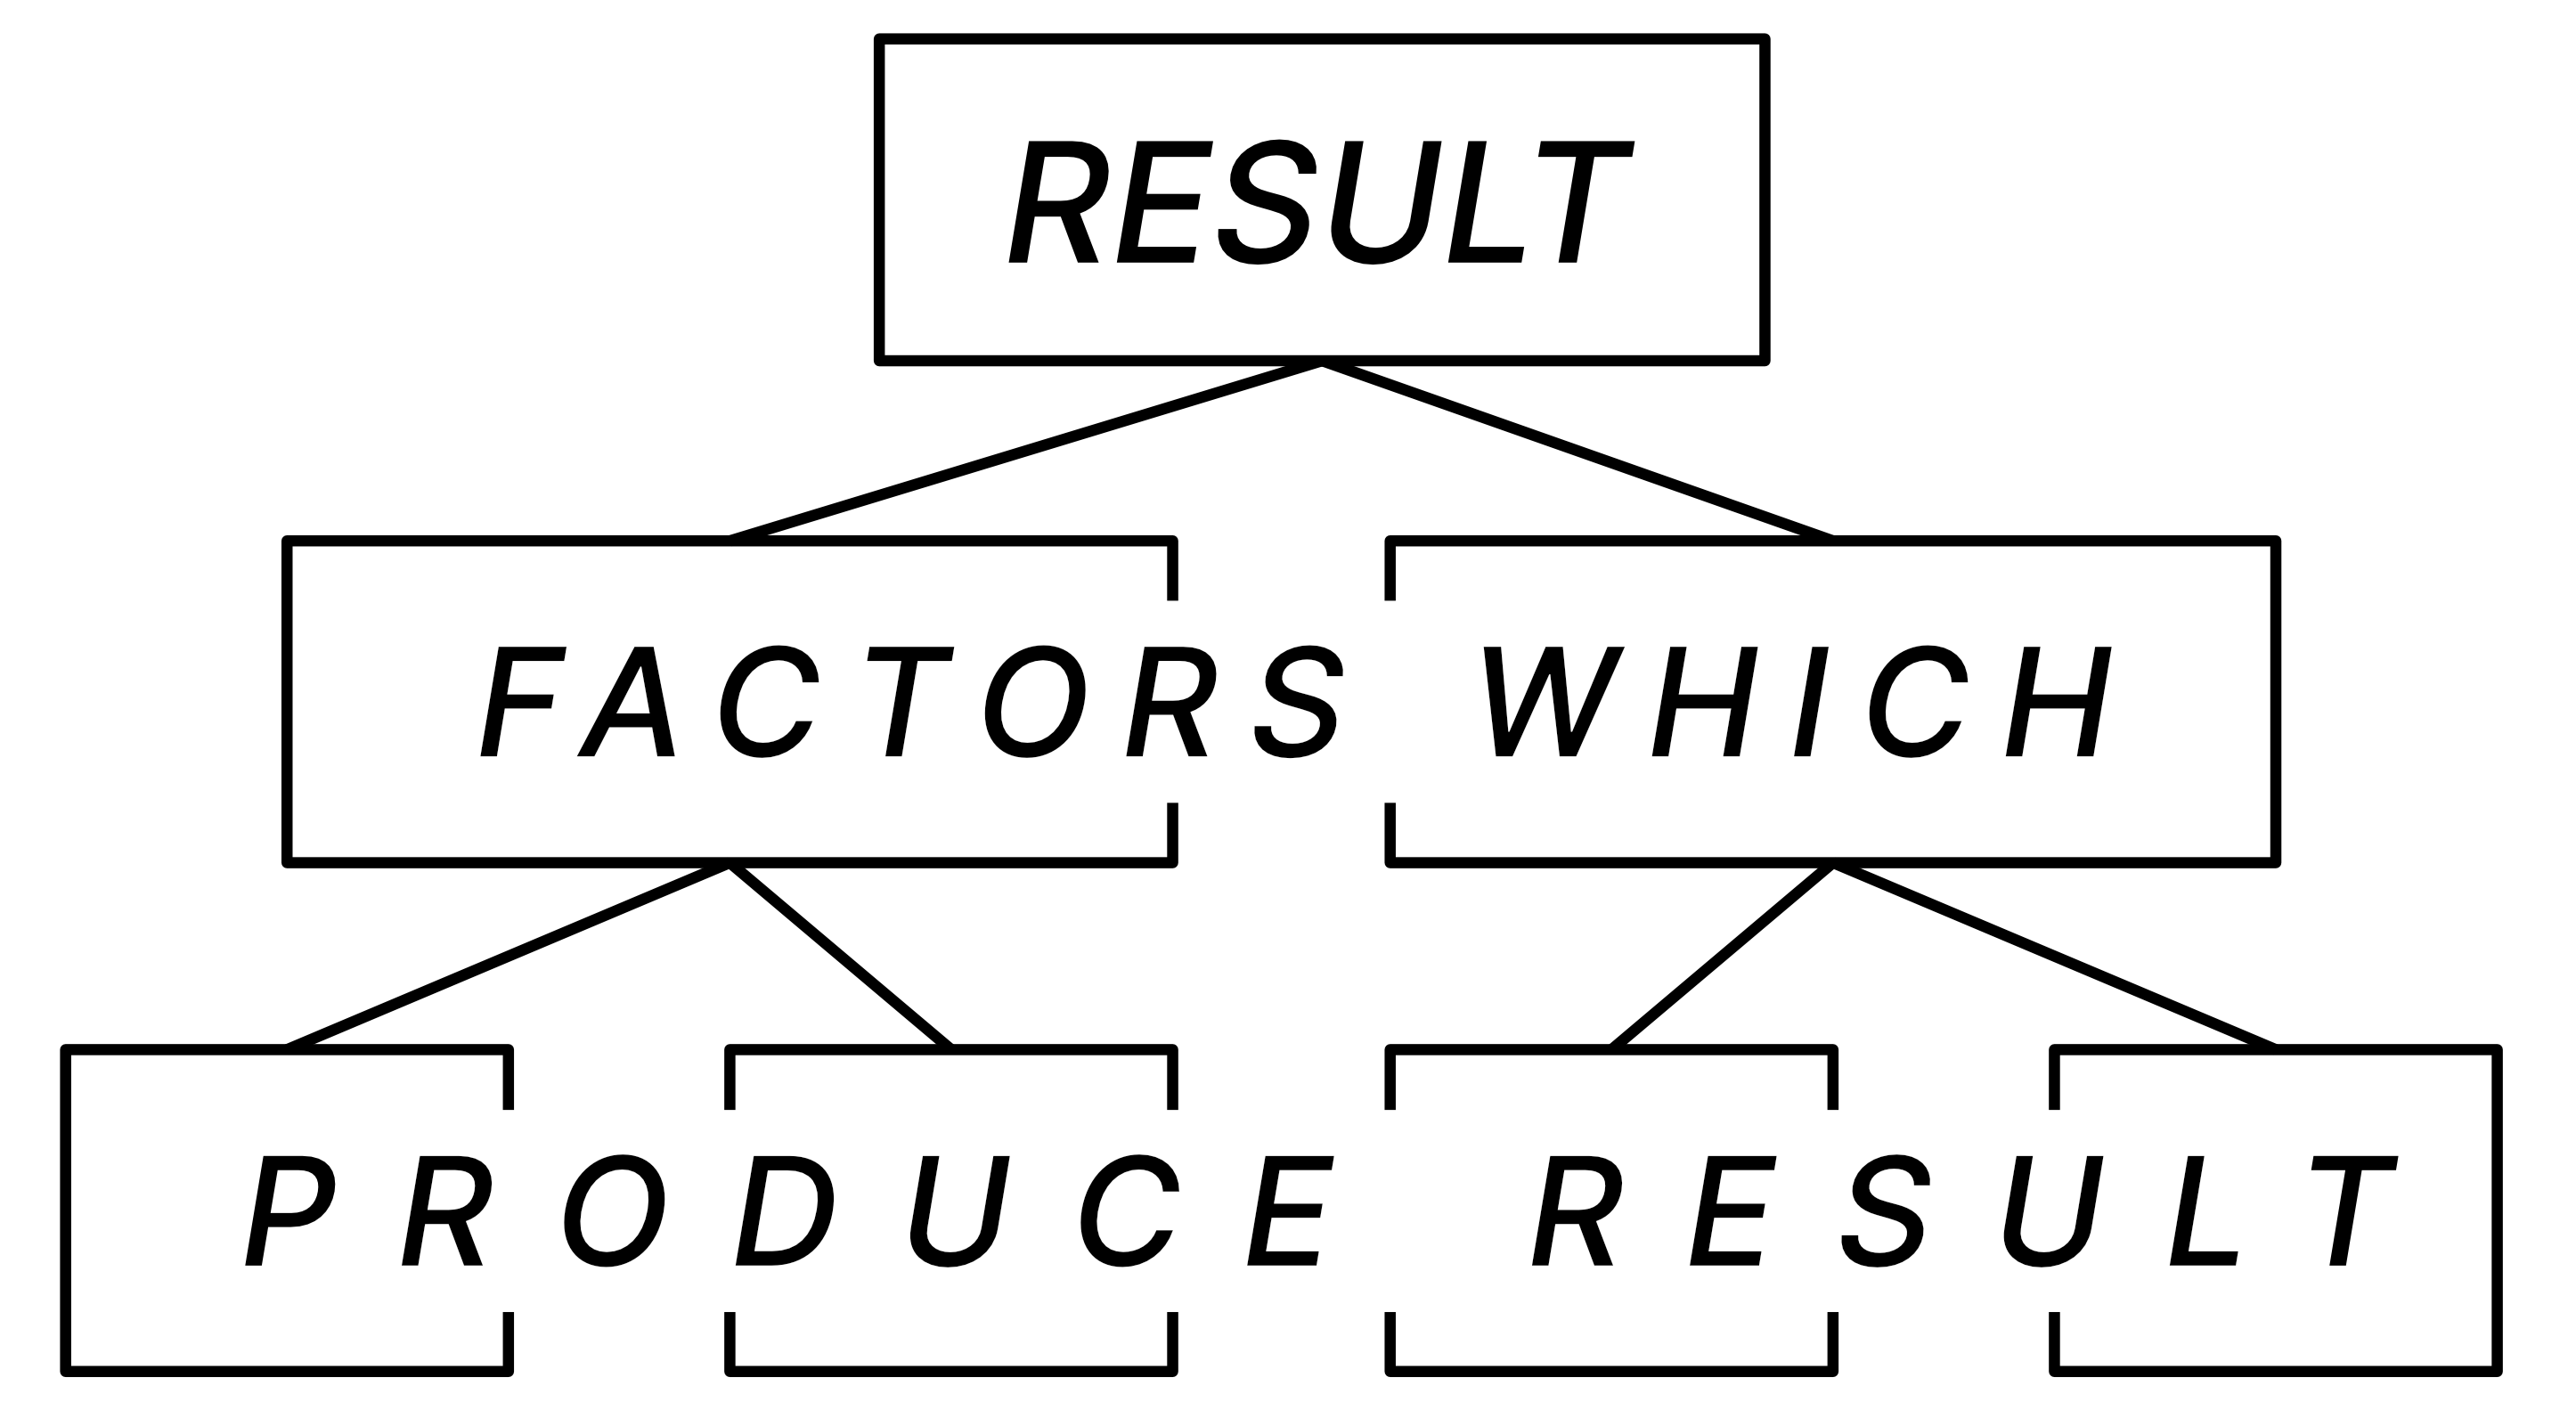 An example deterministic model, depicted as a descending flowchart with result as the top-most box, with linked boxes below containing the factors which produce that result. Reproduced from Hay and Reid, 1988, p. 244).